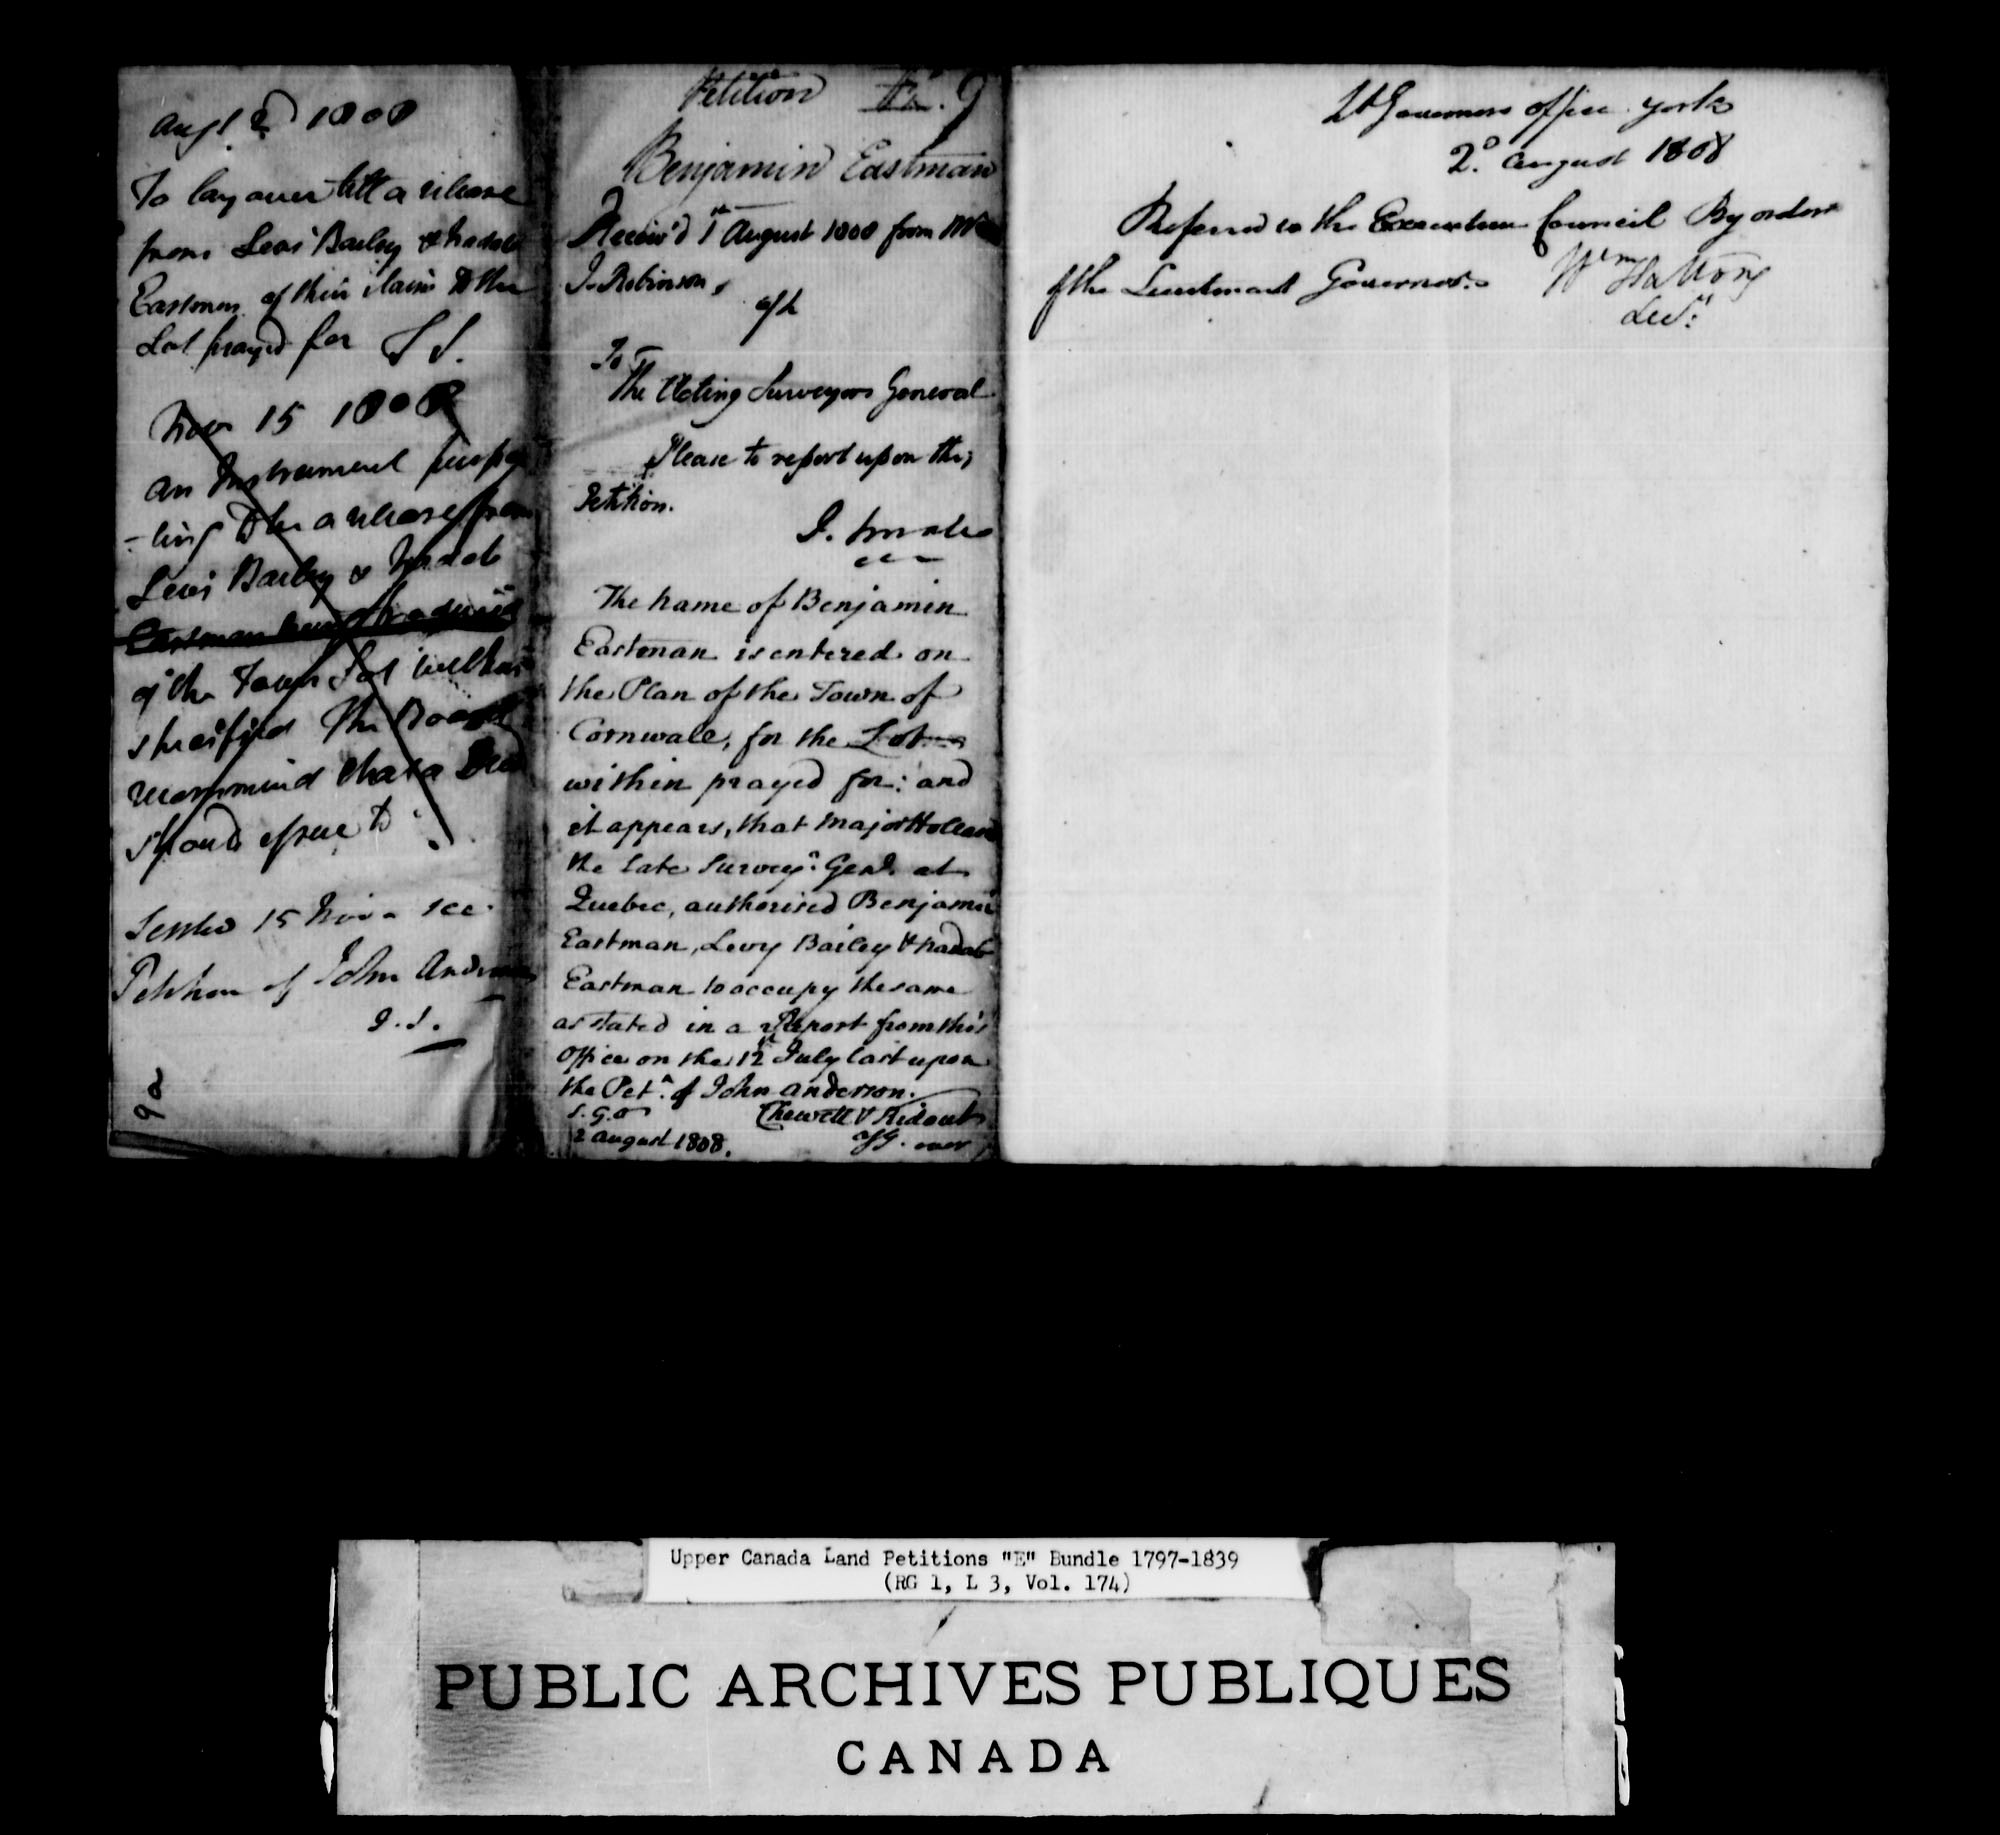 Title: Upper Canada Land Petitions (1763-1865) - Mikan Number: 205131 - Microform: c-1886